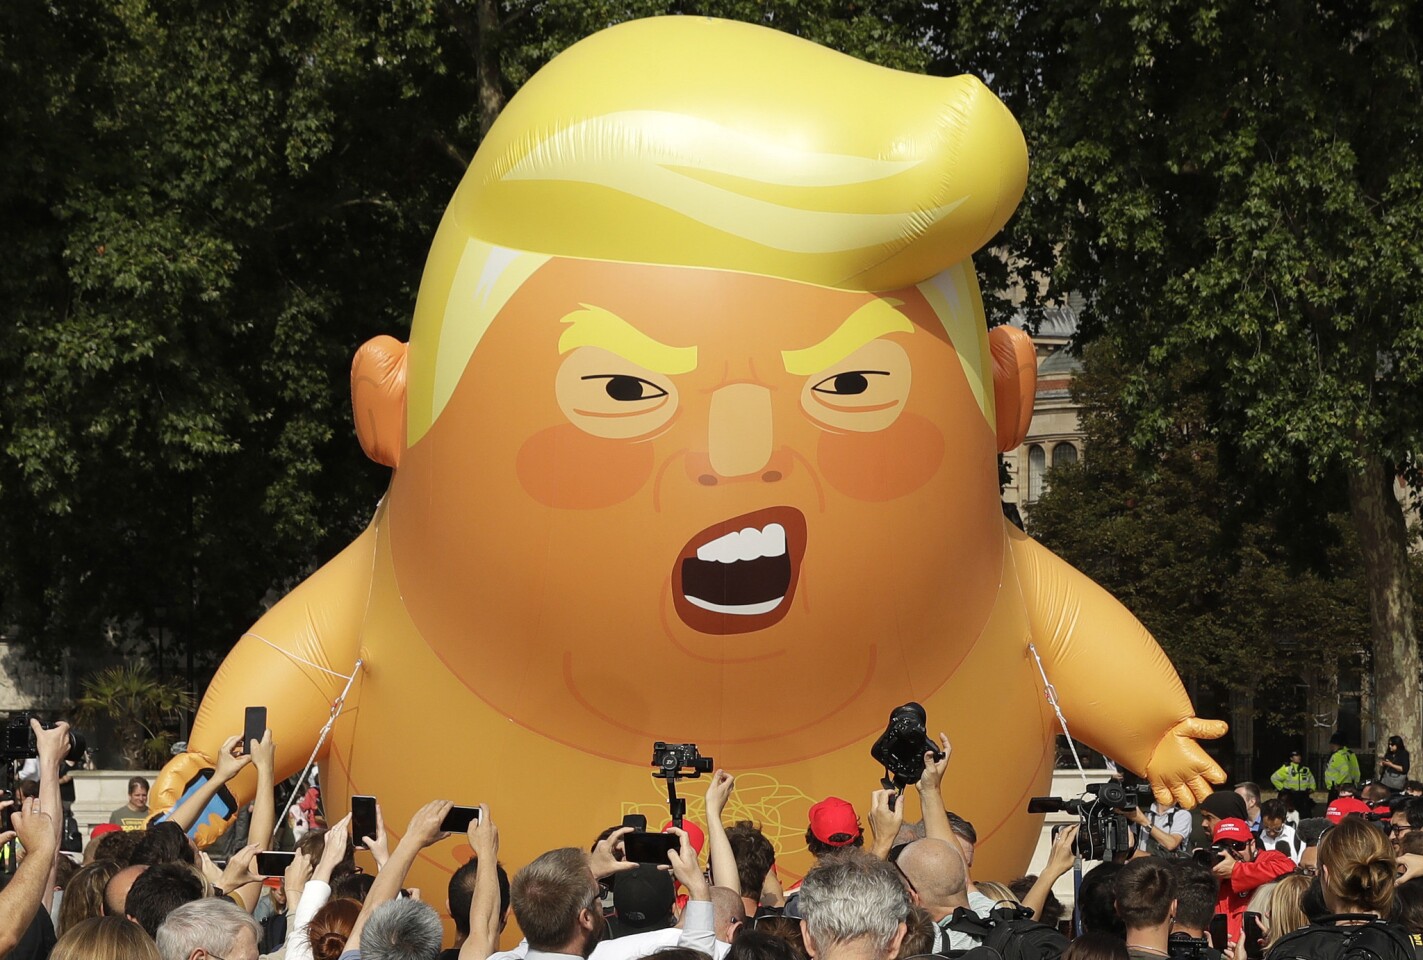 A 20-foot cartoon baby blimp of U.S. President Donald Trump is flown in Parliament Square in London as a protest against his U.K. visit. Trump is making his first trip to Britain as president after a tense summit with NATO leaders in Brussels.